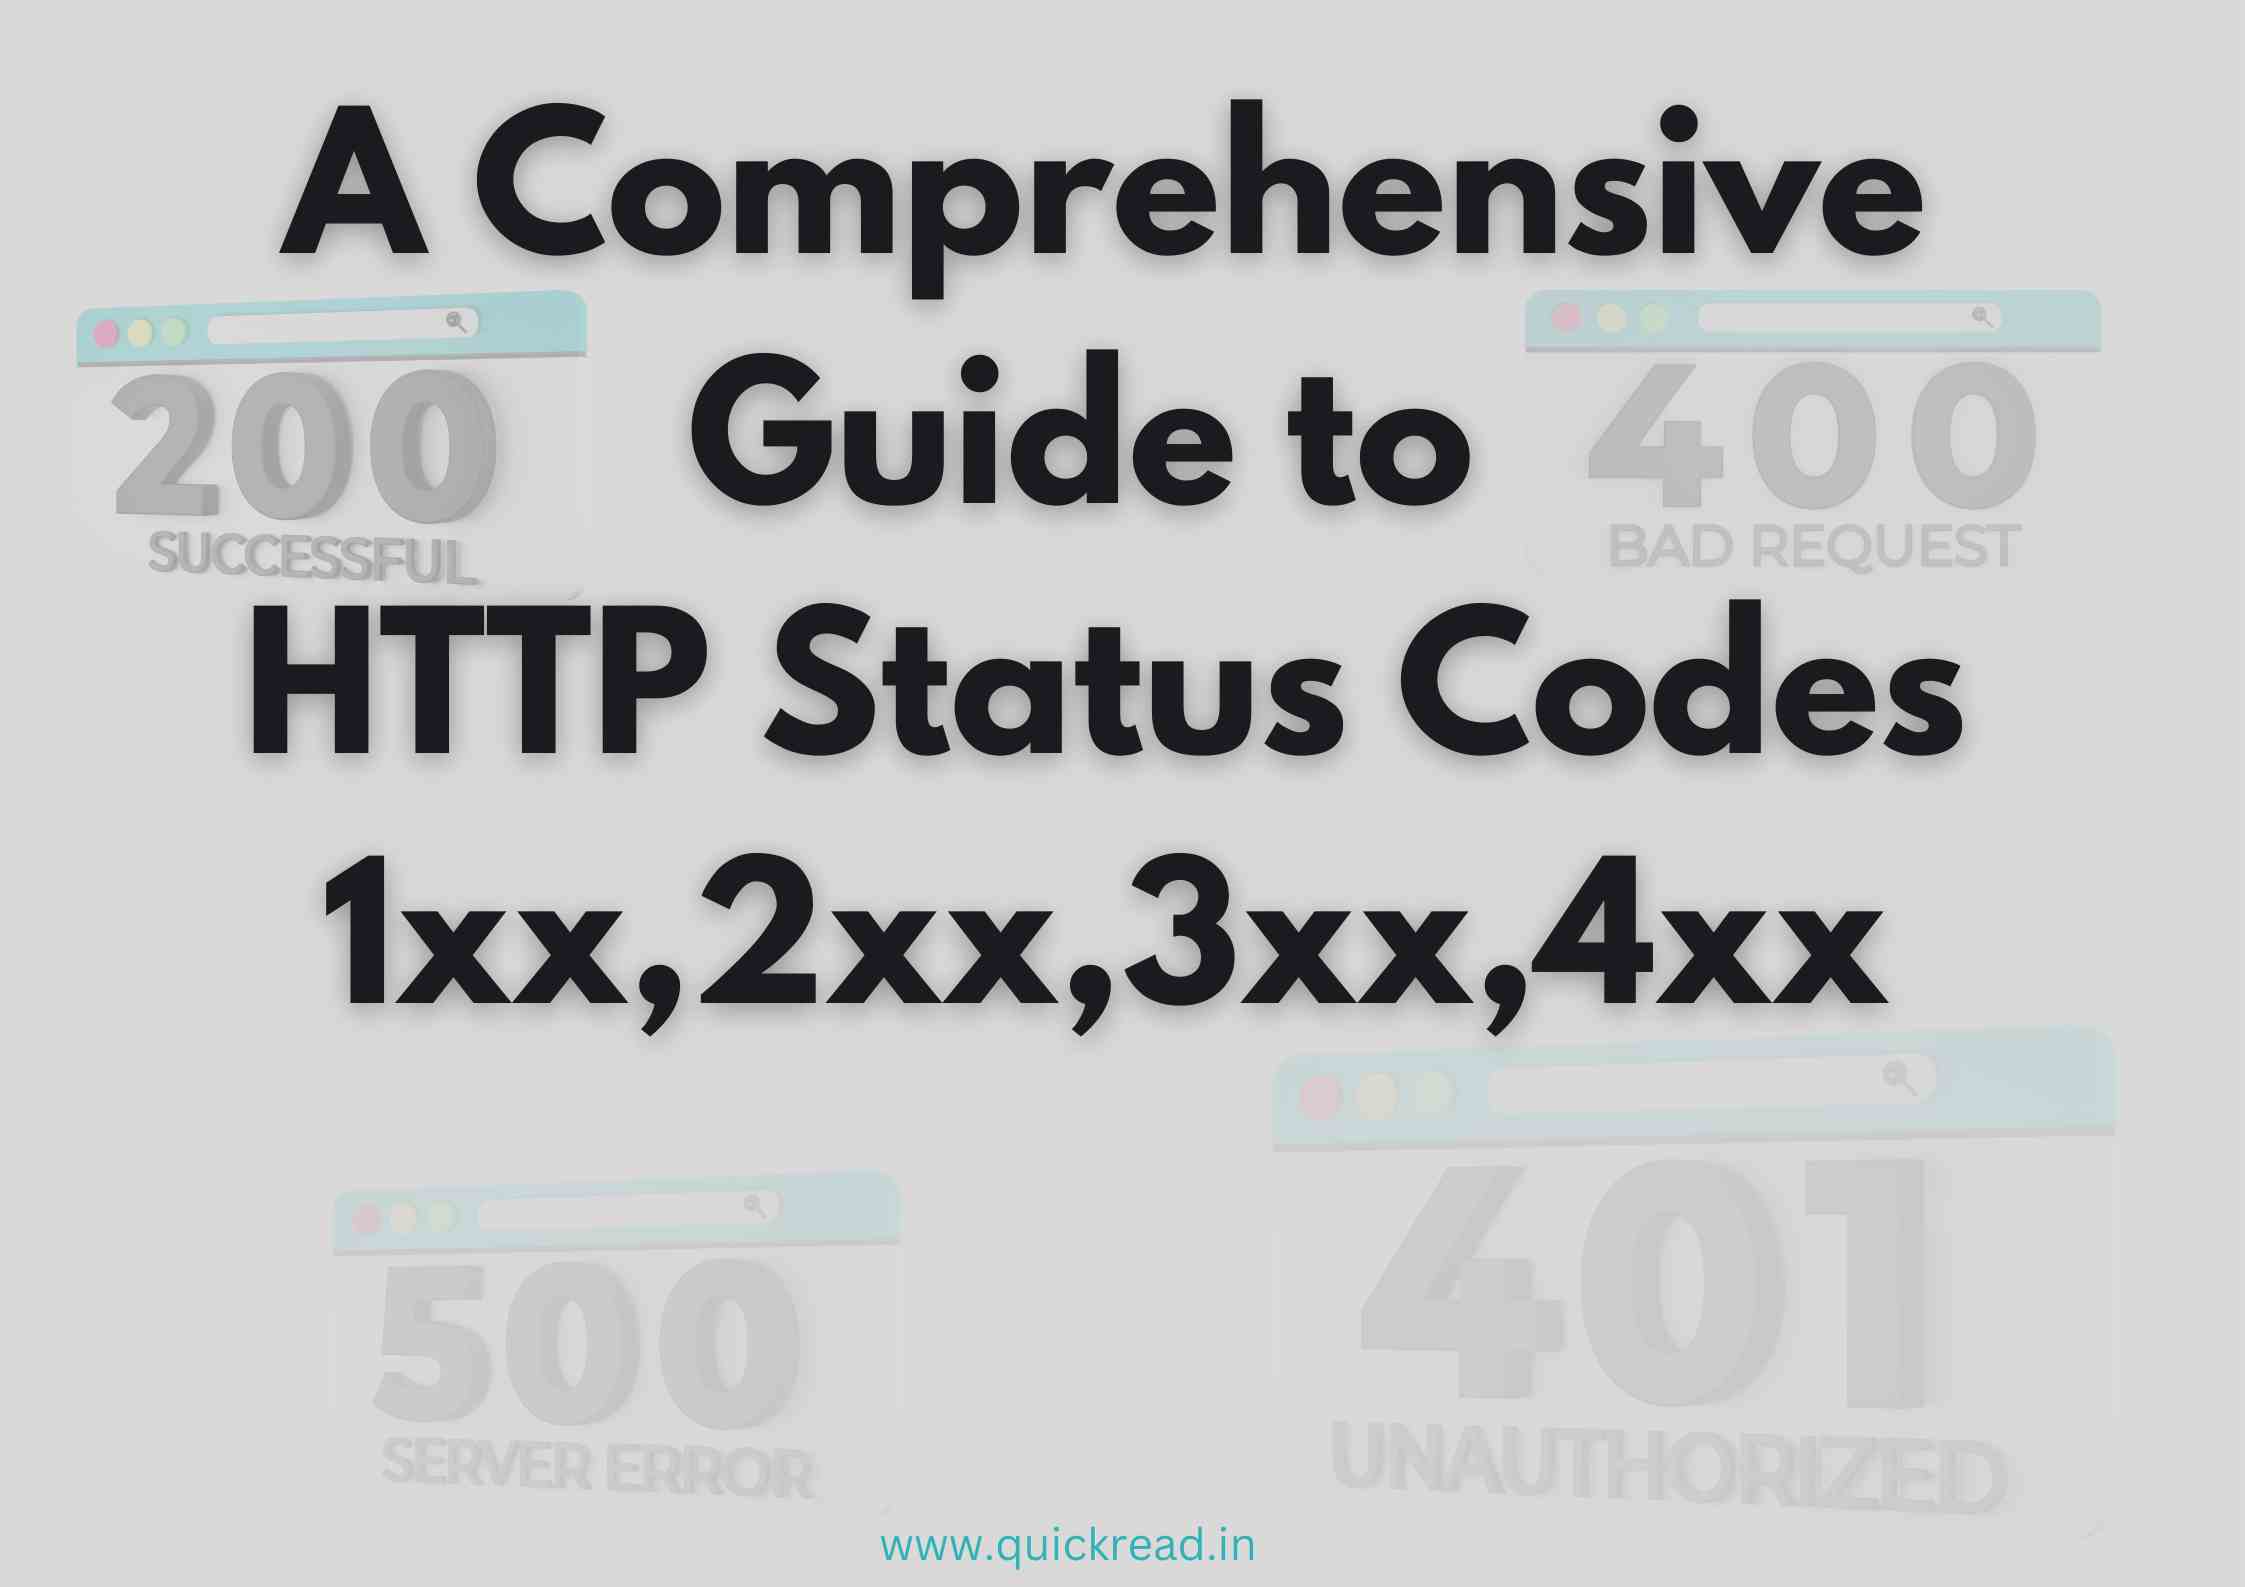 A Comprehensive Guide to HTTP Status Codes 1xx,2xx,3xx